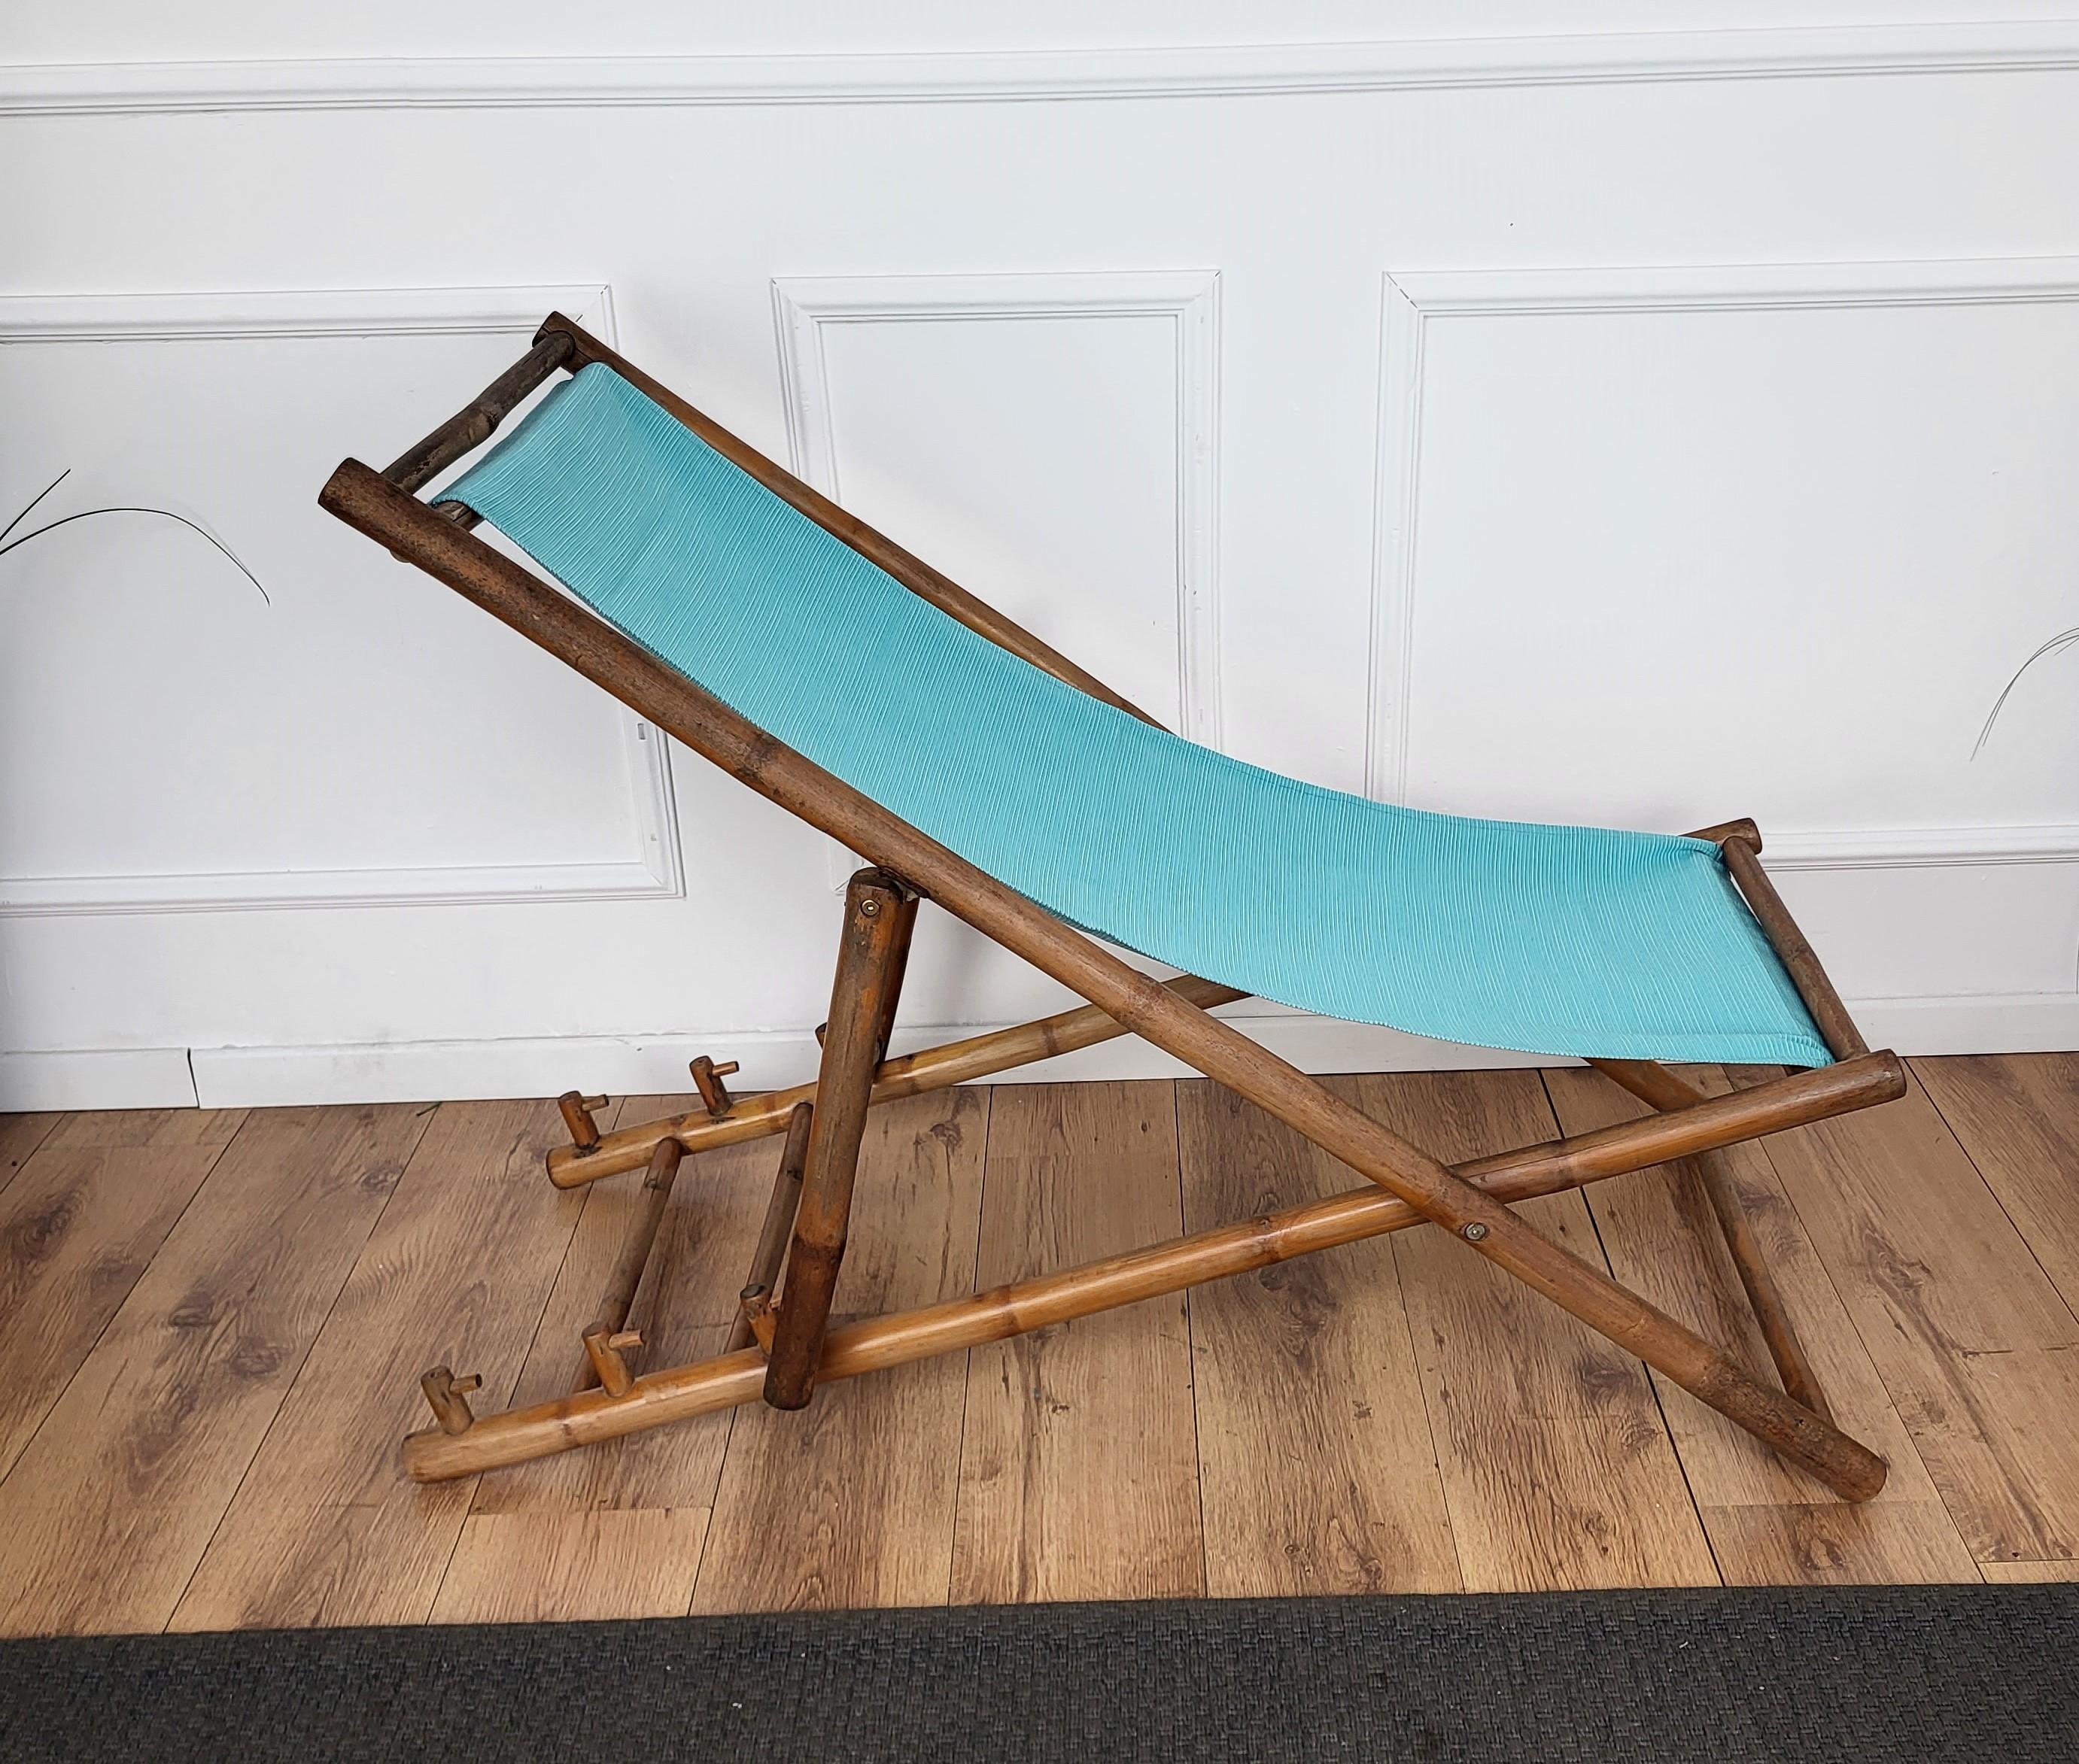 Italian Transat Folding Deck Chair Patio Lounger, Chaise Longue, Bambo Wood and Fabric For Sale